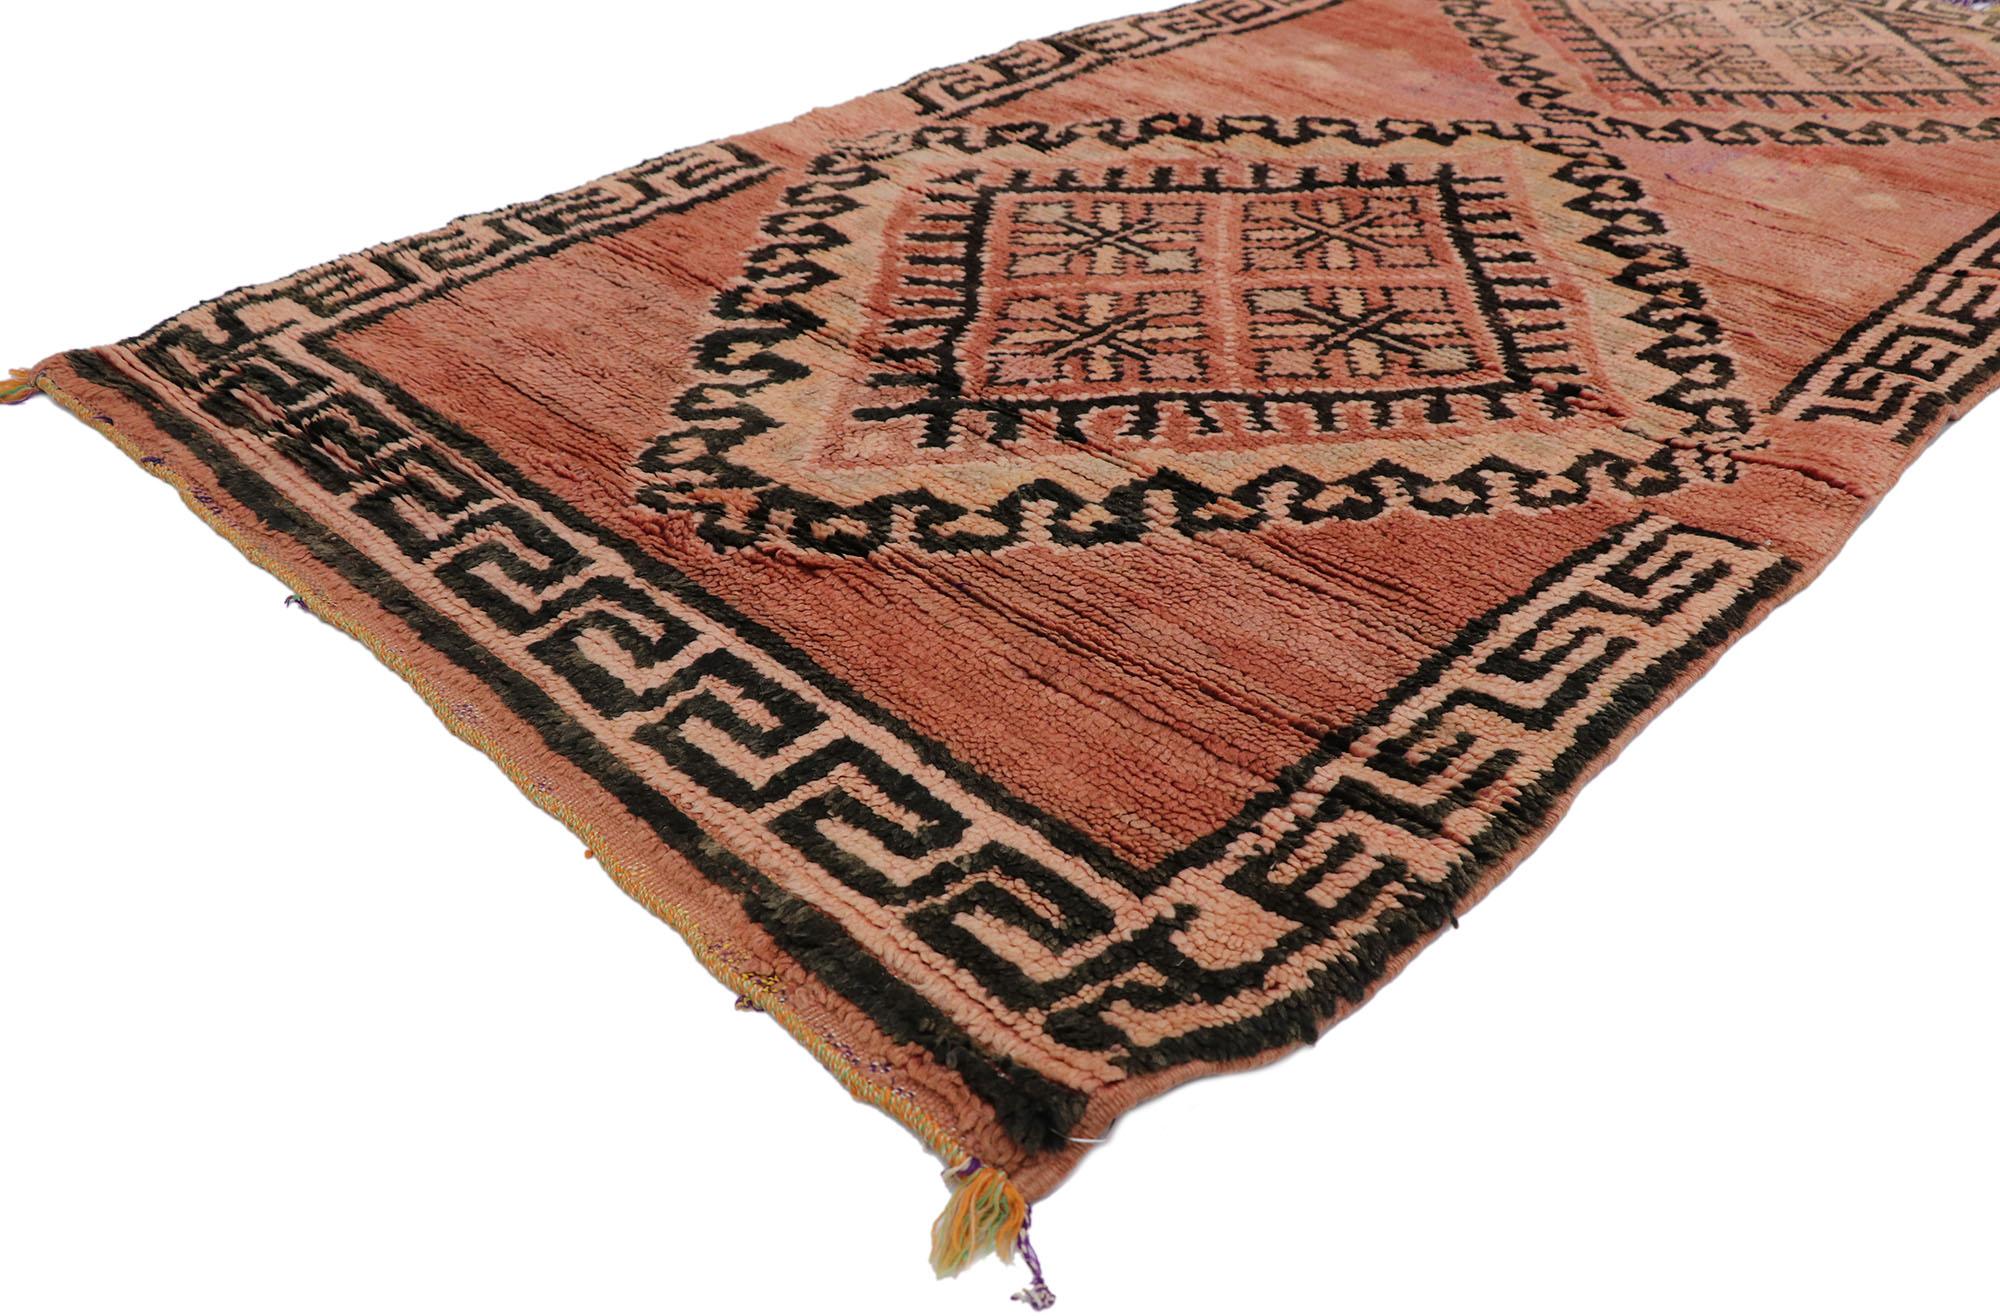 21668 Vintage Berber Moroccan rug with Tribal Style 03'03 x 06'02. With its simplicity and expressive tribal design, this hand-knotted wool vintage Berber Boujad Moroccan rug is a captivating vision of woven beauty. The abrashed field features two